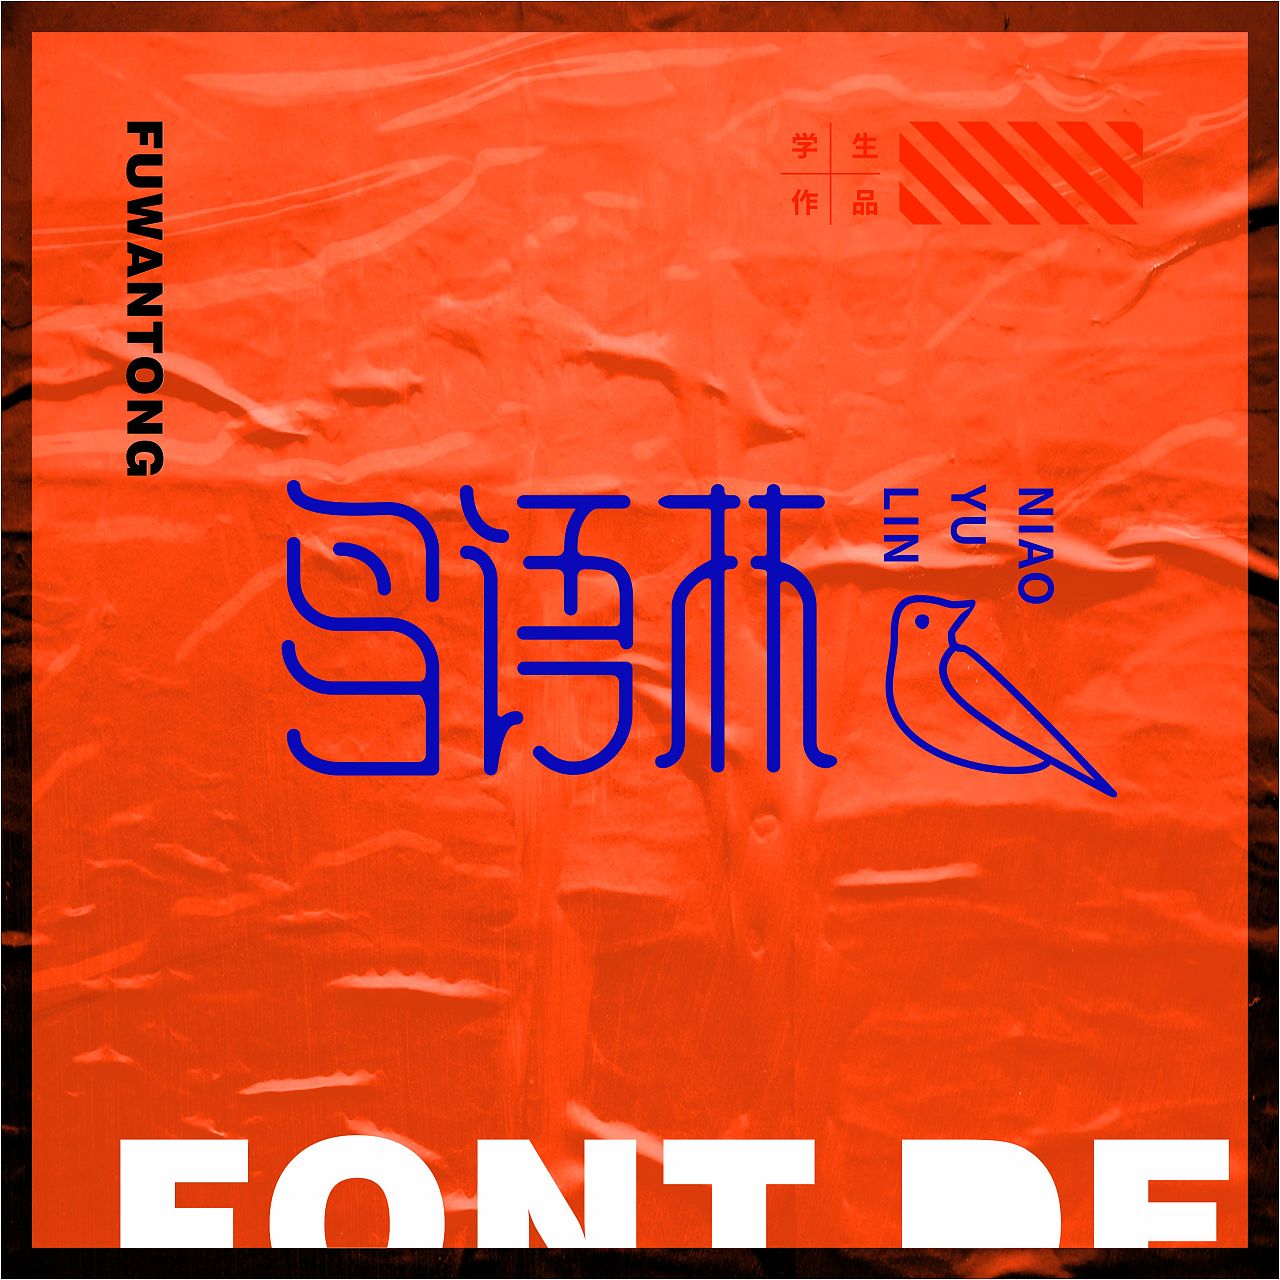 Chinese Creative Font Design-Outstanding Works of Students Shown in March